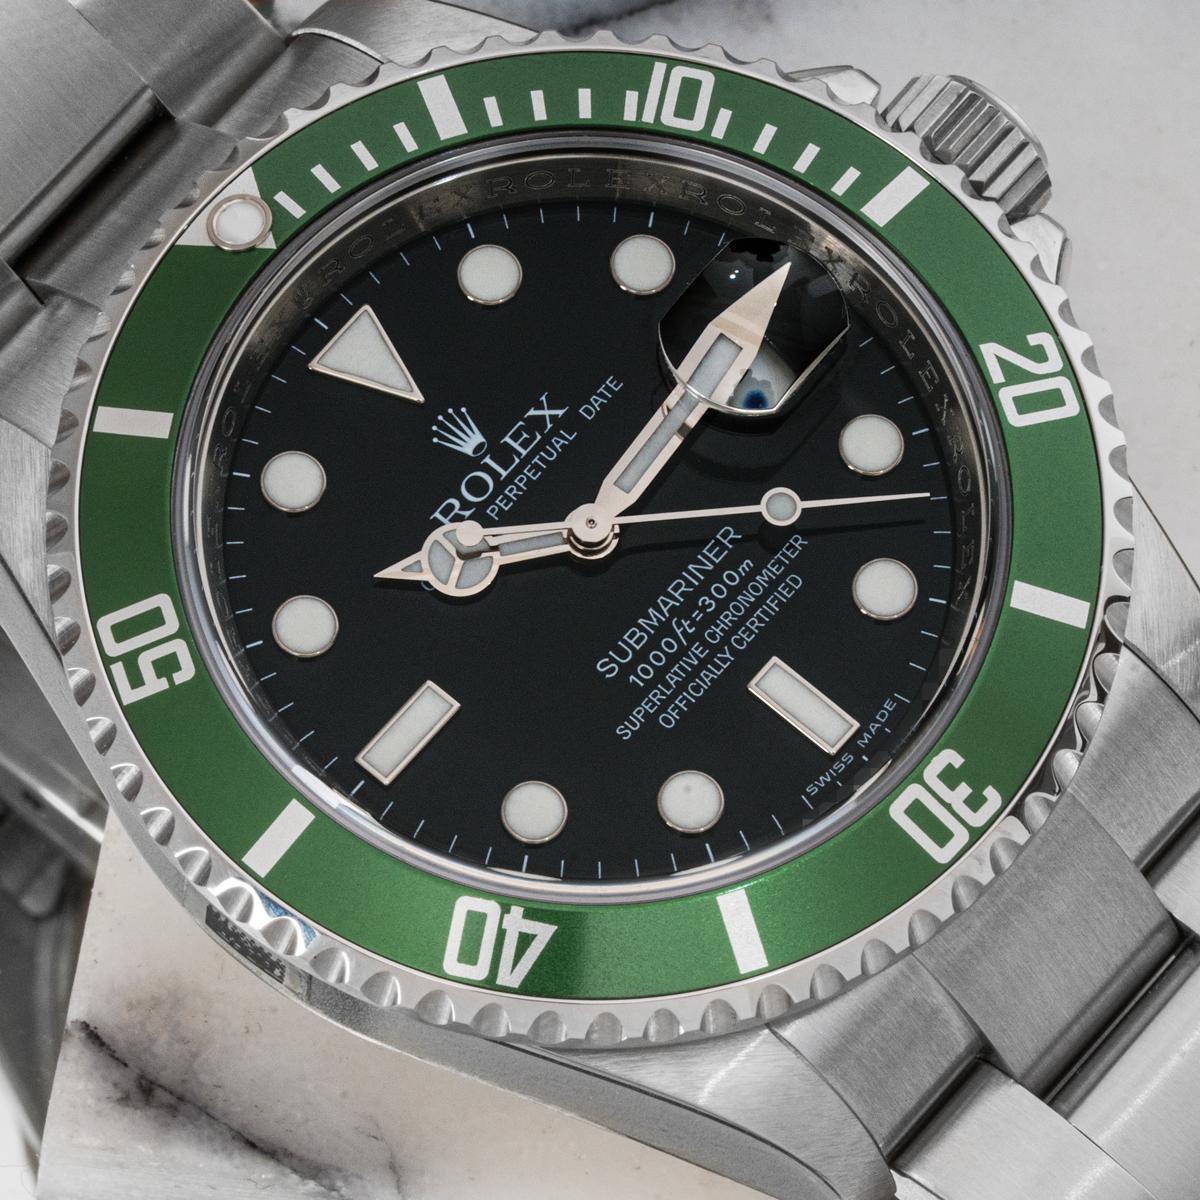 An unworn new old stock Submariner Date by Rolex in stainless steel, known as a Kermit. Features a black dial and a green bezel with 60-minute graduations.

The Oyster bracelet comes equipped with an Oysterlock deployant clasp. Fitted with a